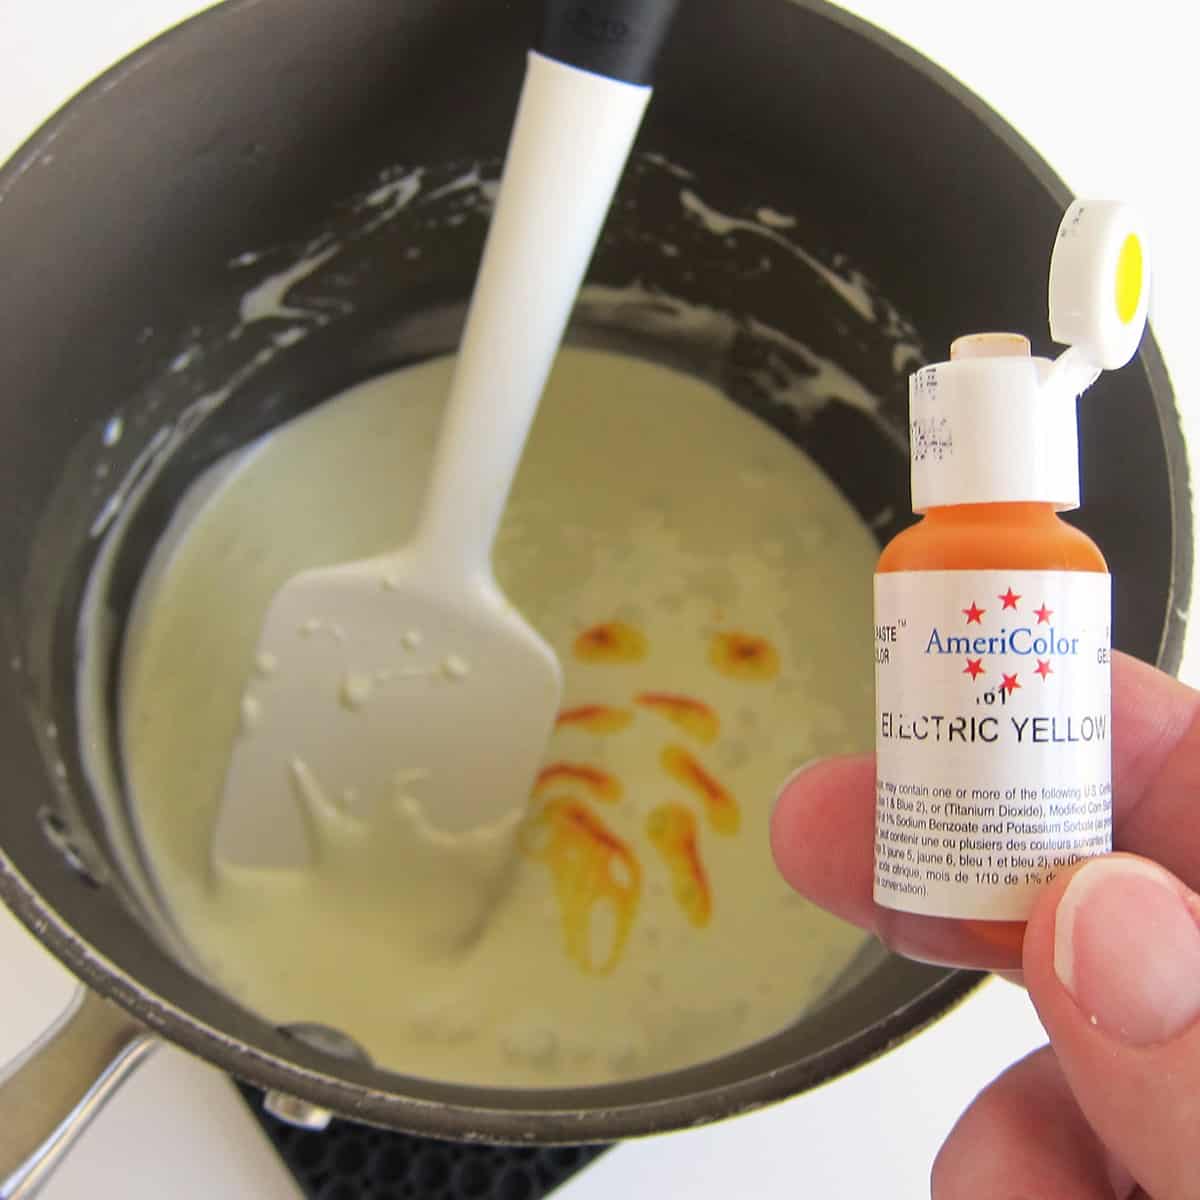 Coloring melted marshmallows and butter with AmeriColor Electric Yellow food coloring